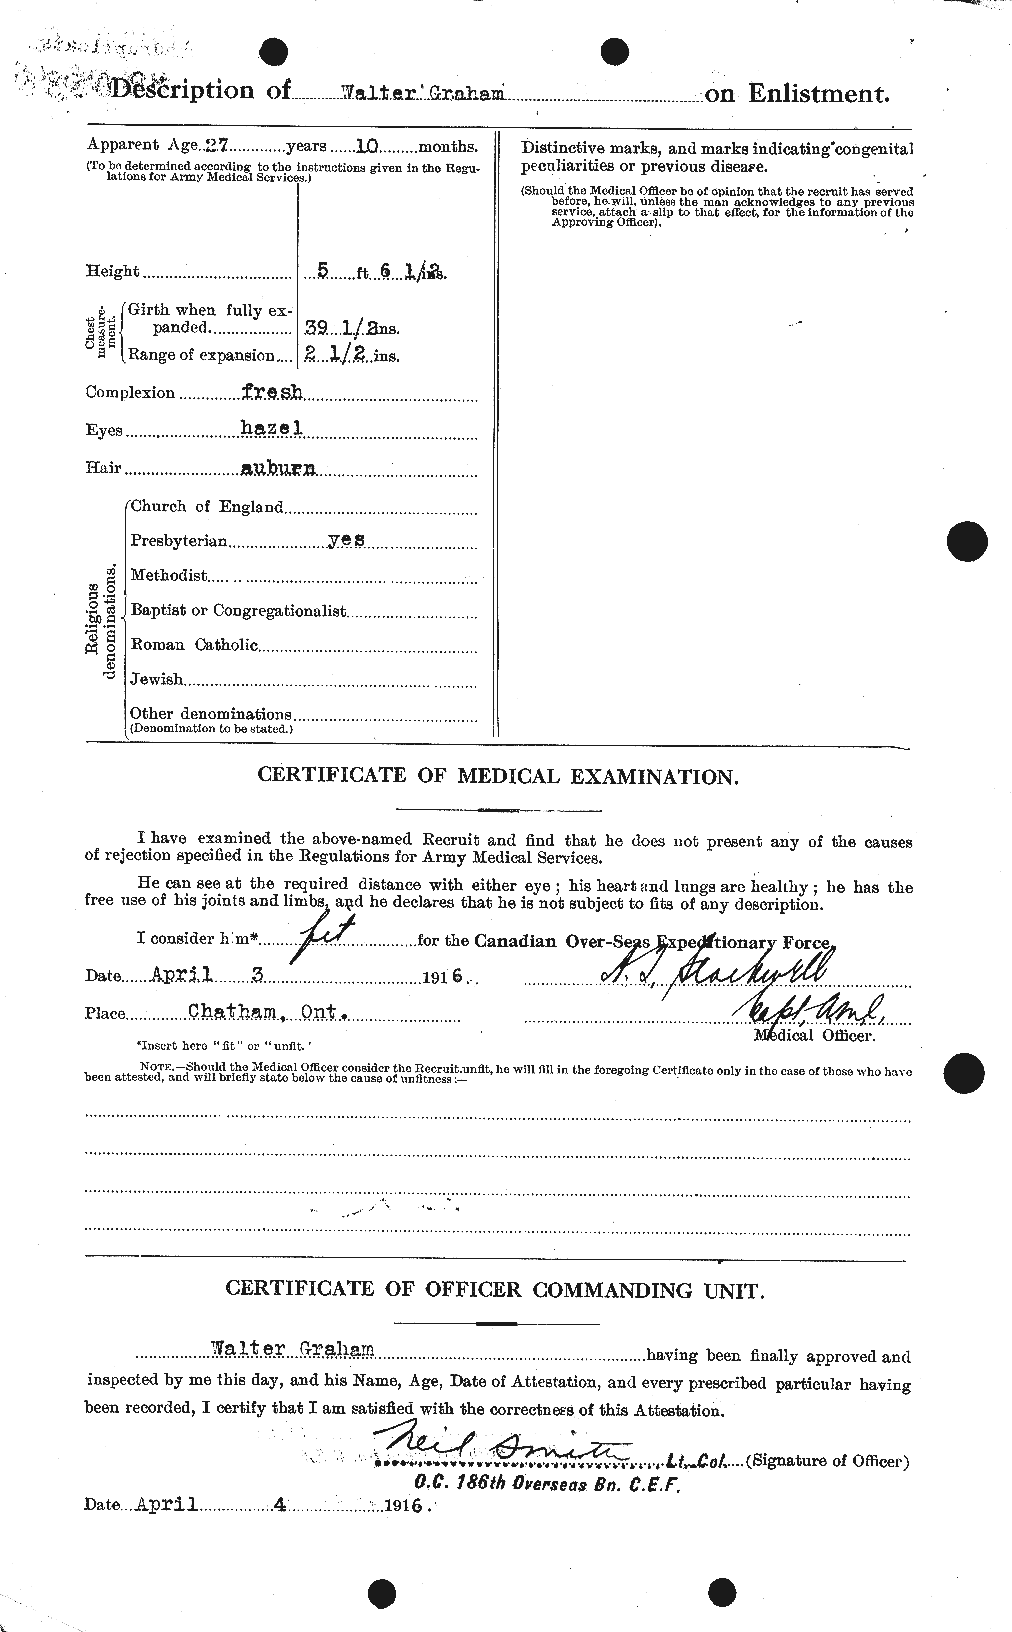 Personnel Records of the First World War - CEF 362651b